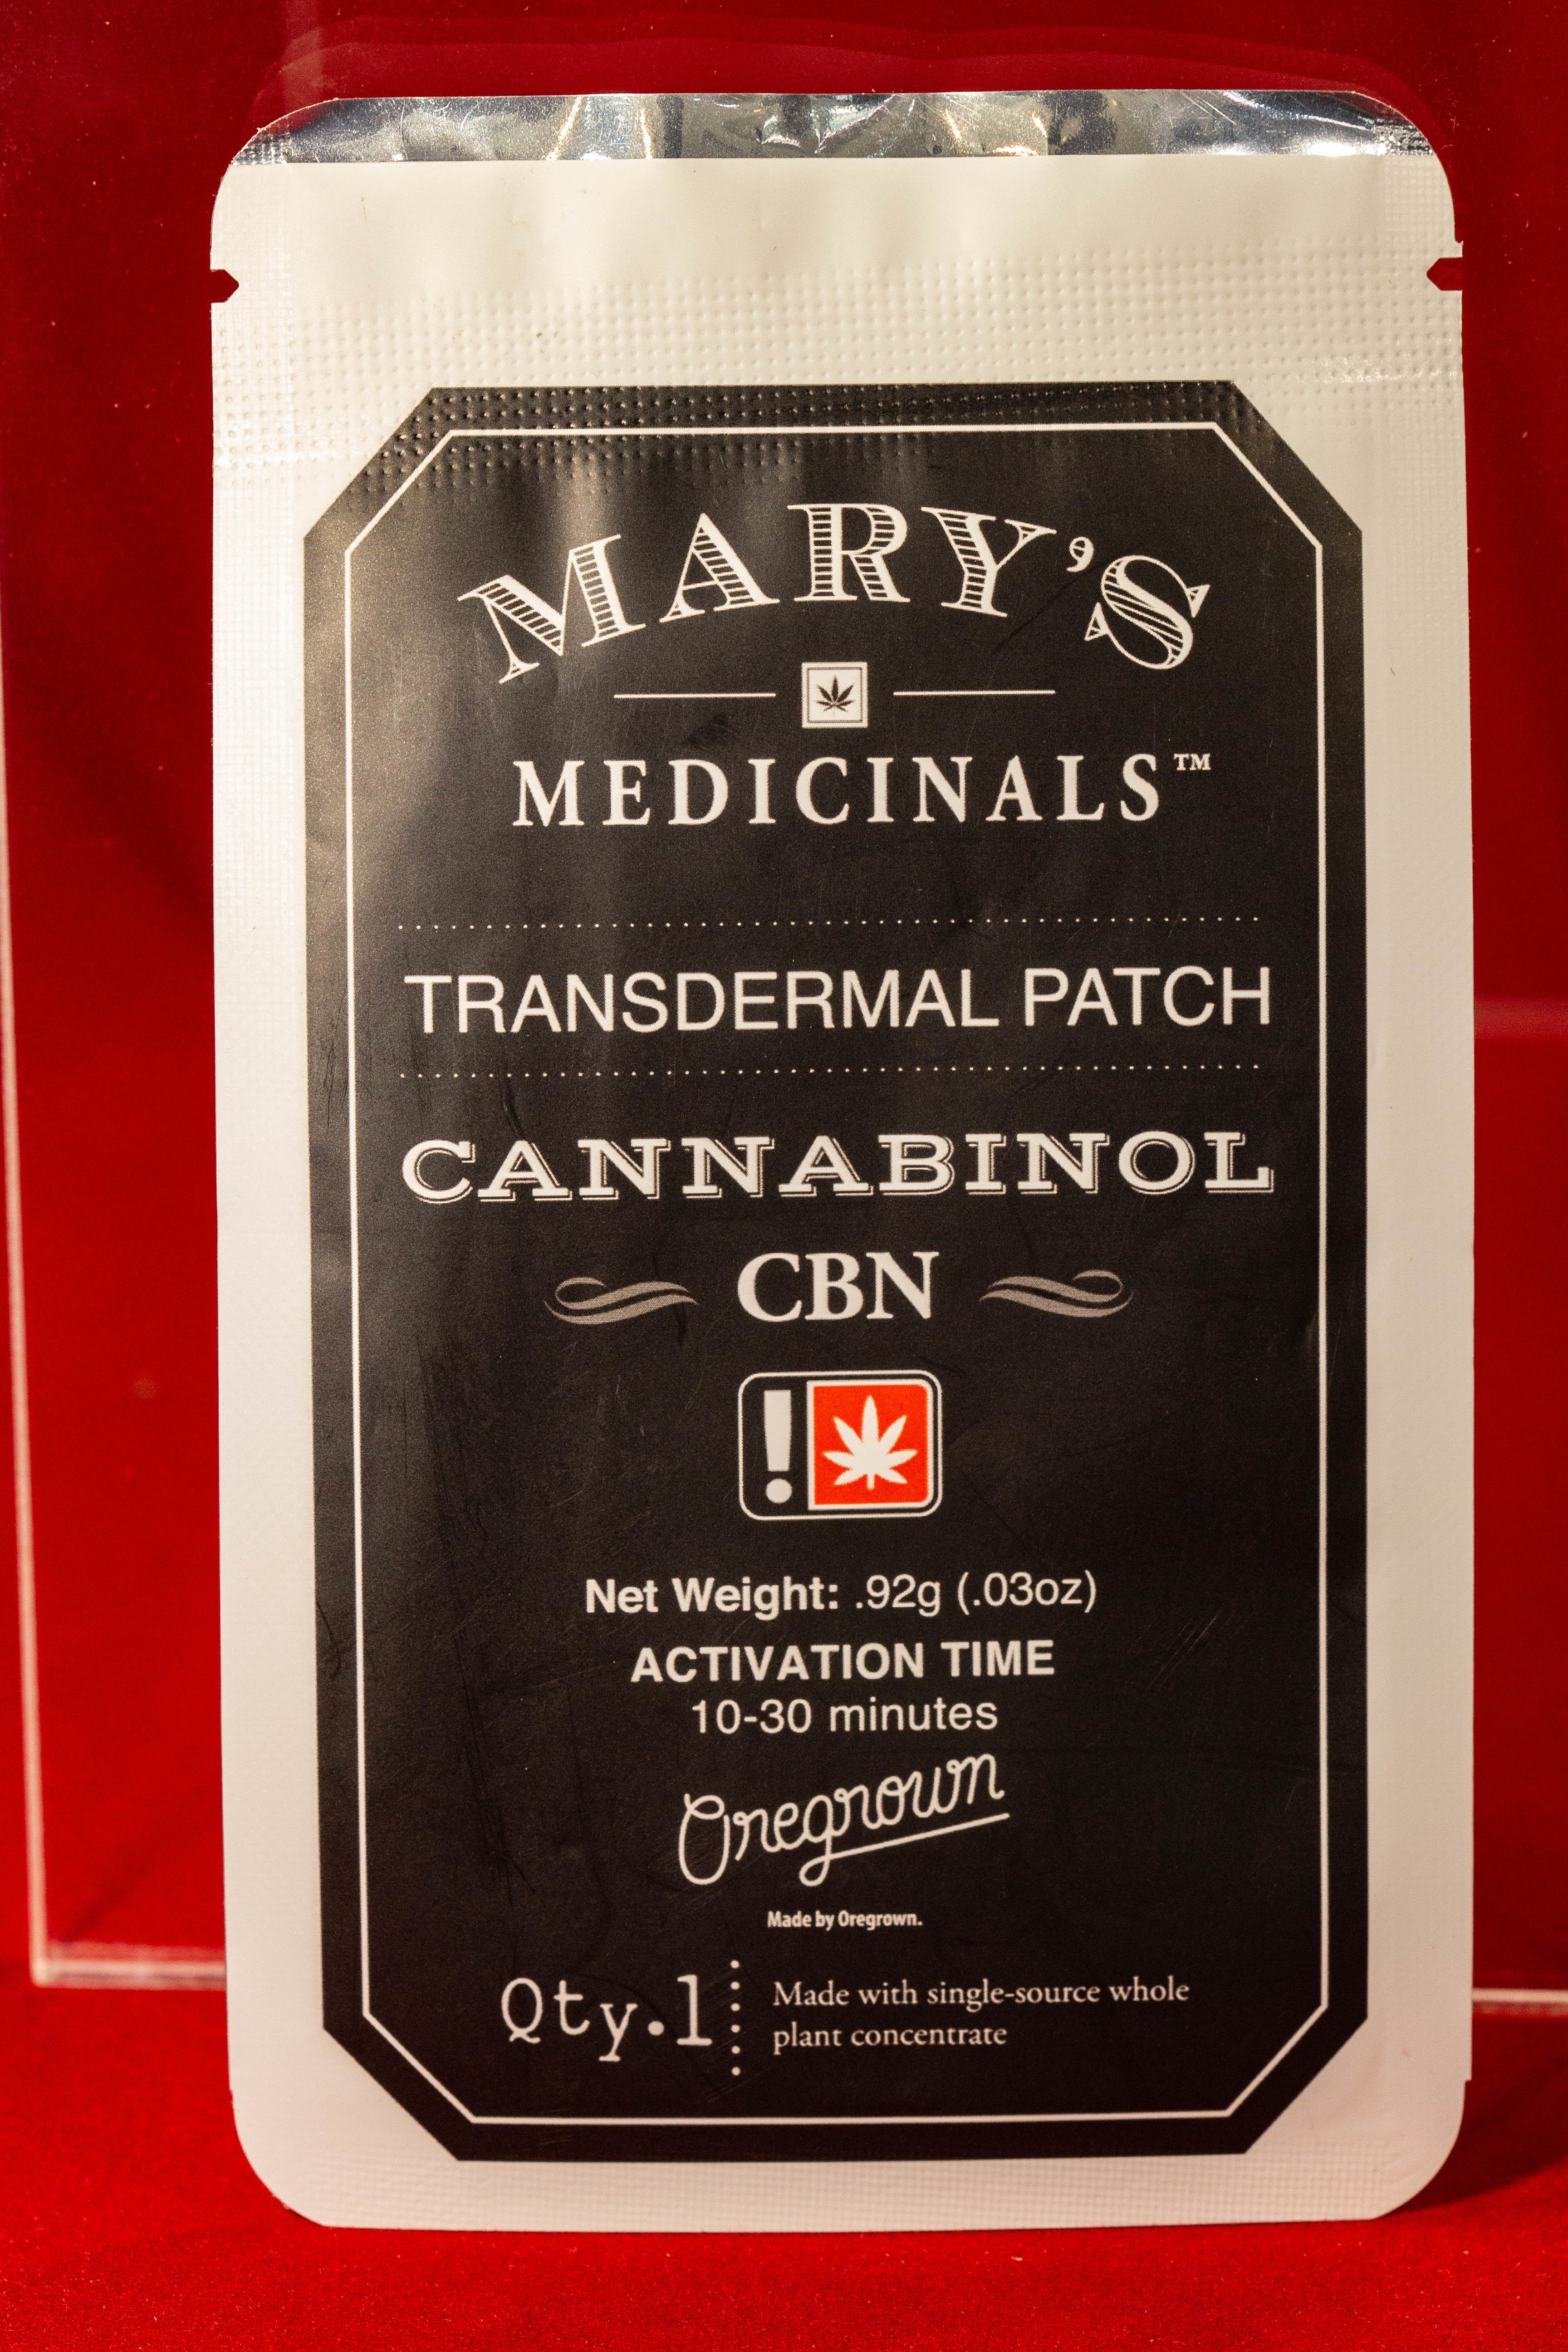 topicals-cbn-transdermal-patches-by-marys-medicinals